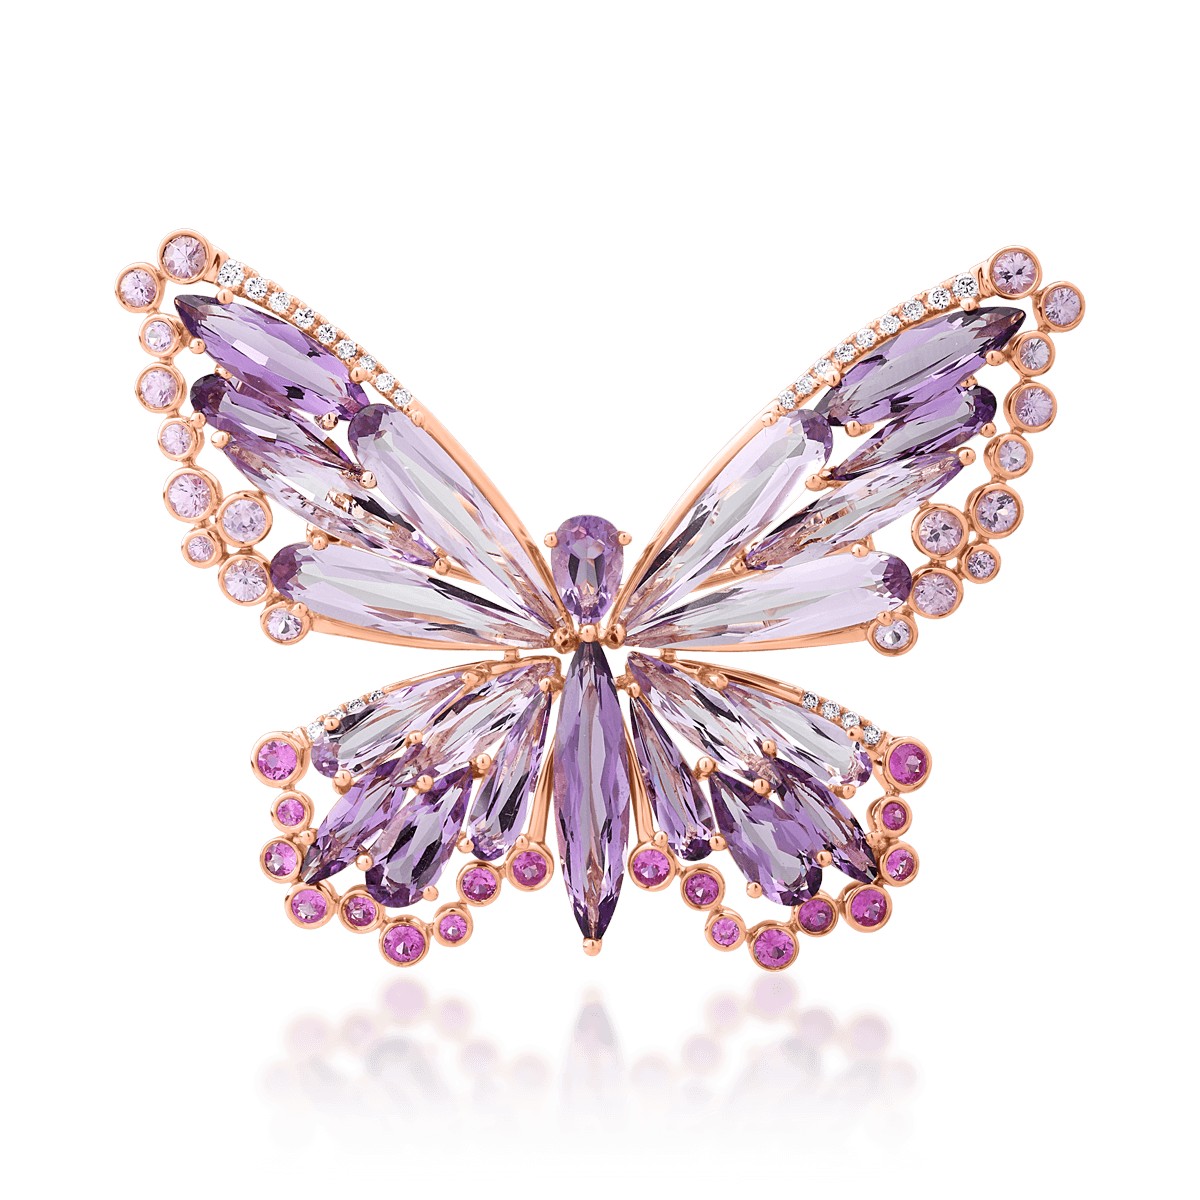 18K rose gold brooch with 11.1ct precious and semi-precious stones